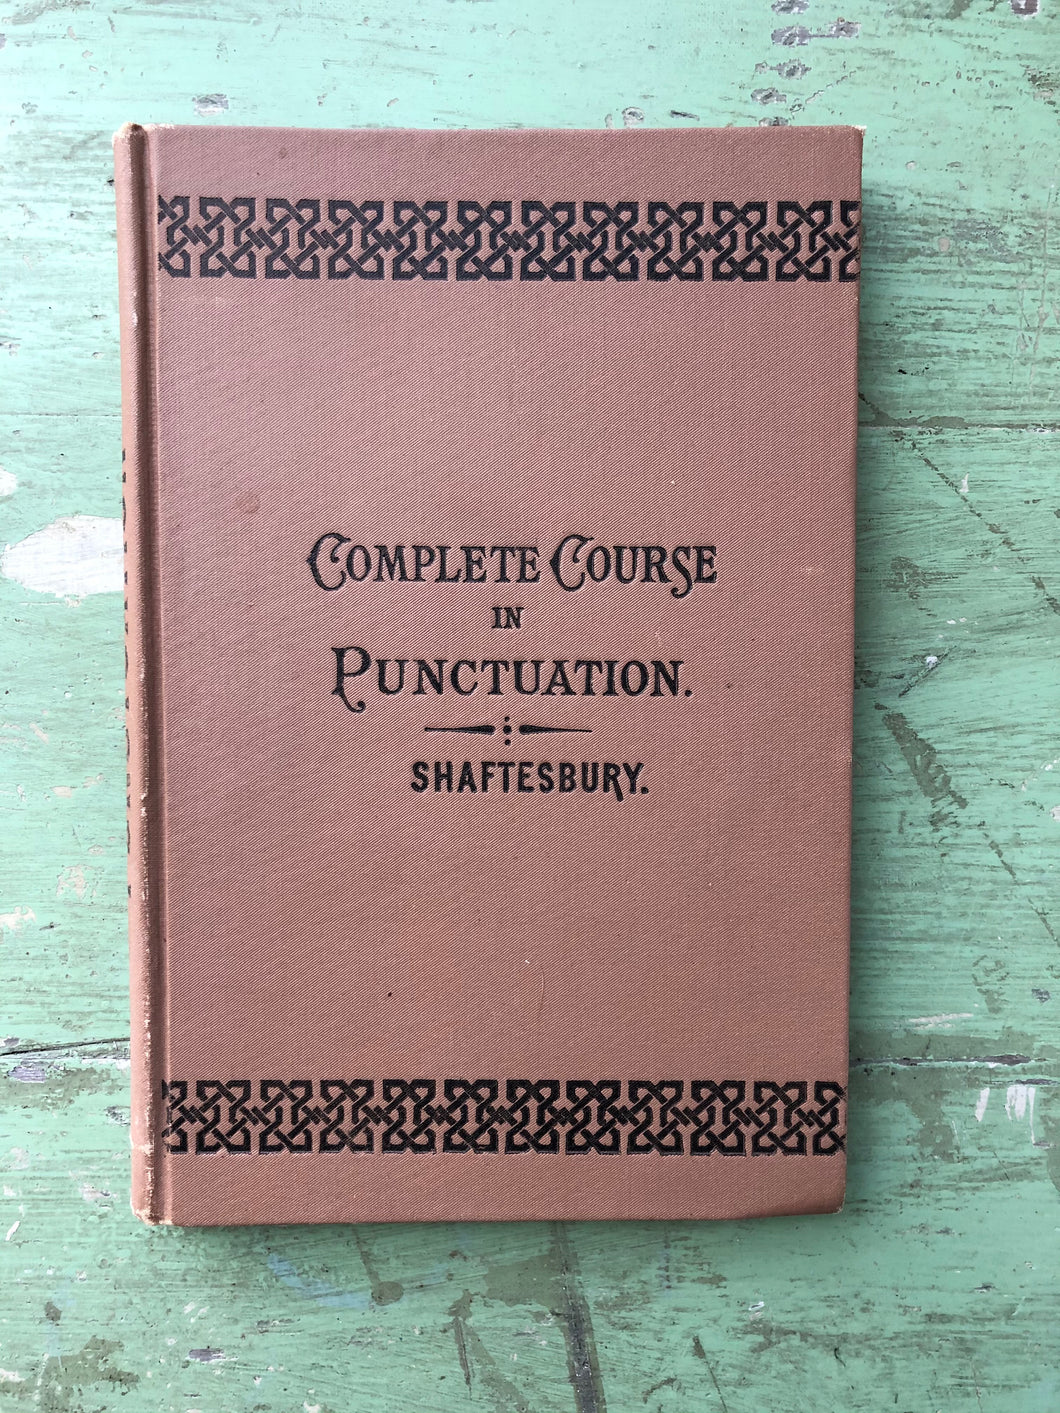 “One Hundred Lessons in Punctuation: A System of Fixed Rules” by Edmund Shaftesbury